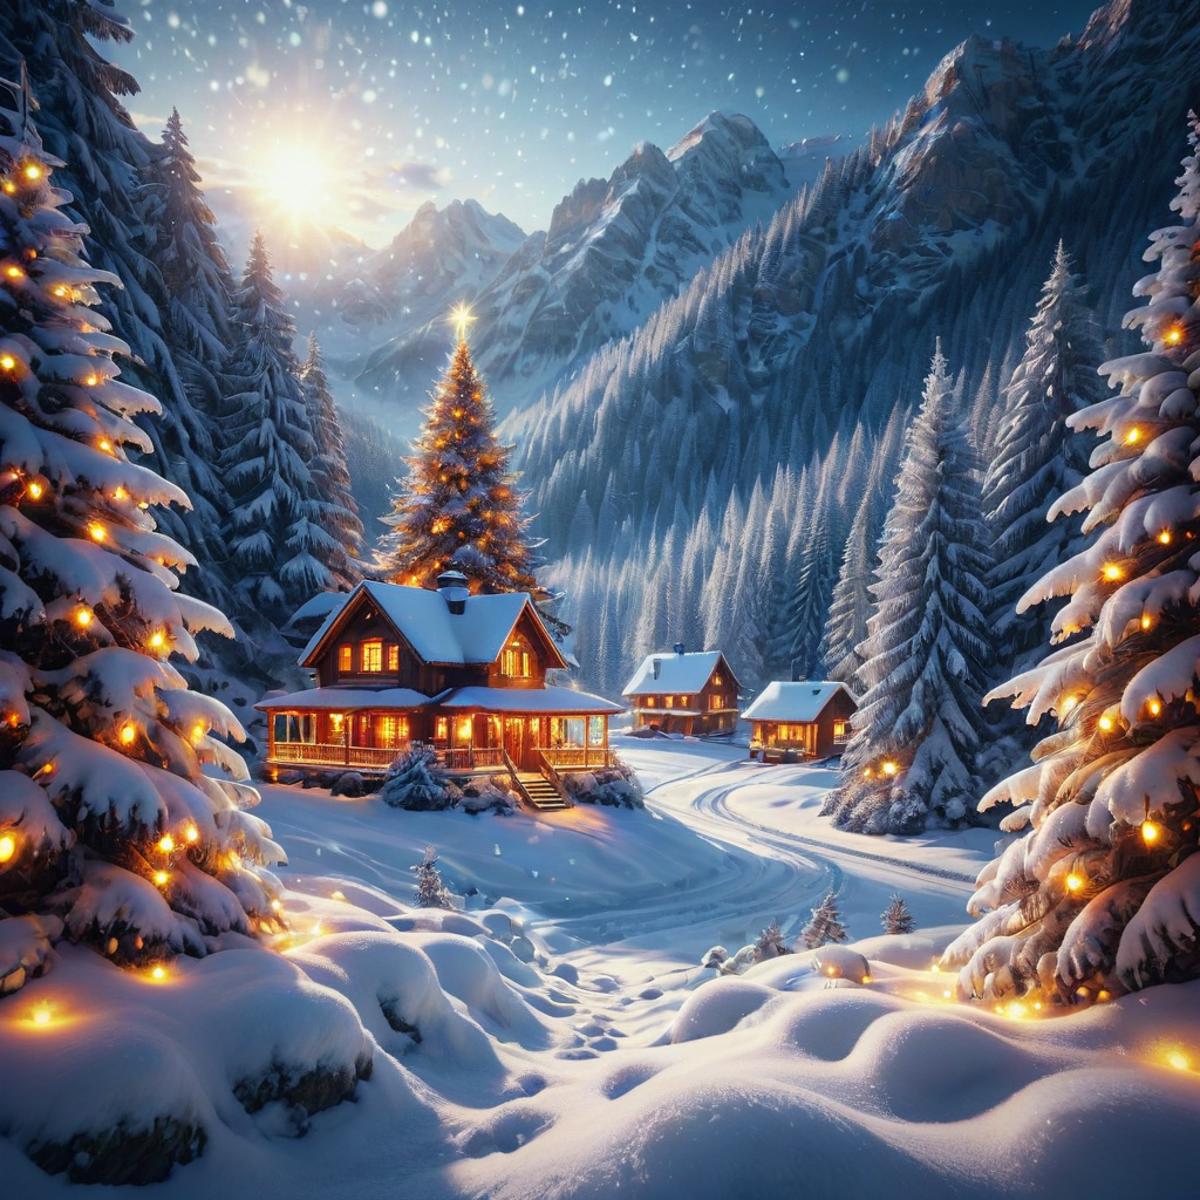 A Snowy Mountain Christmas Scene with Lit-Up Houses and Trees